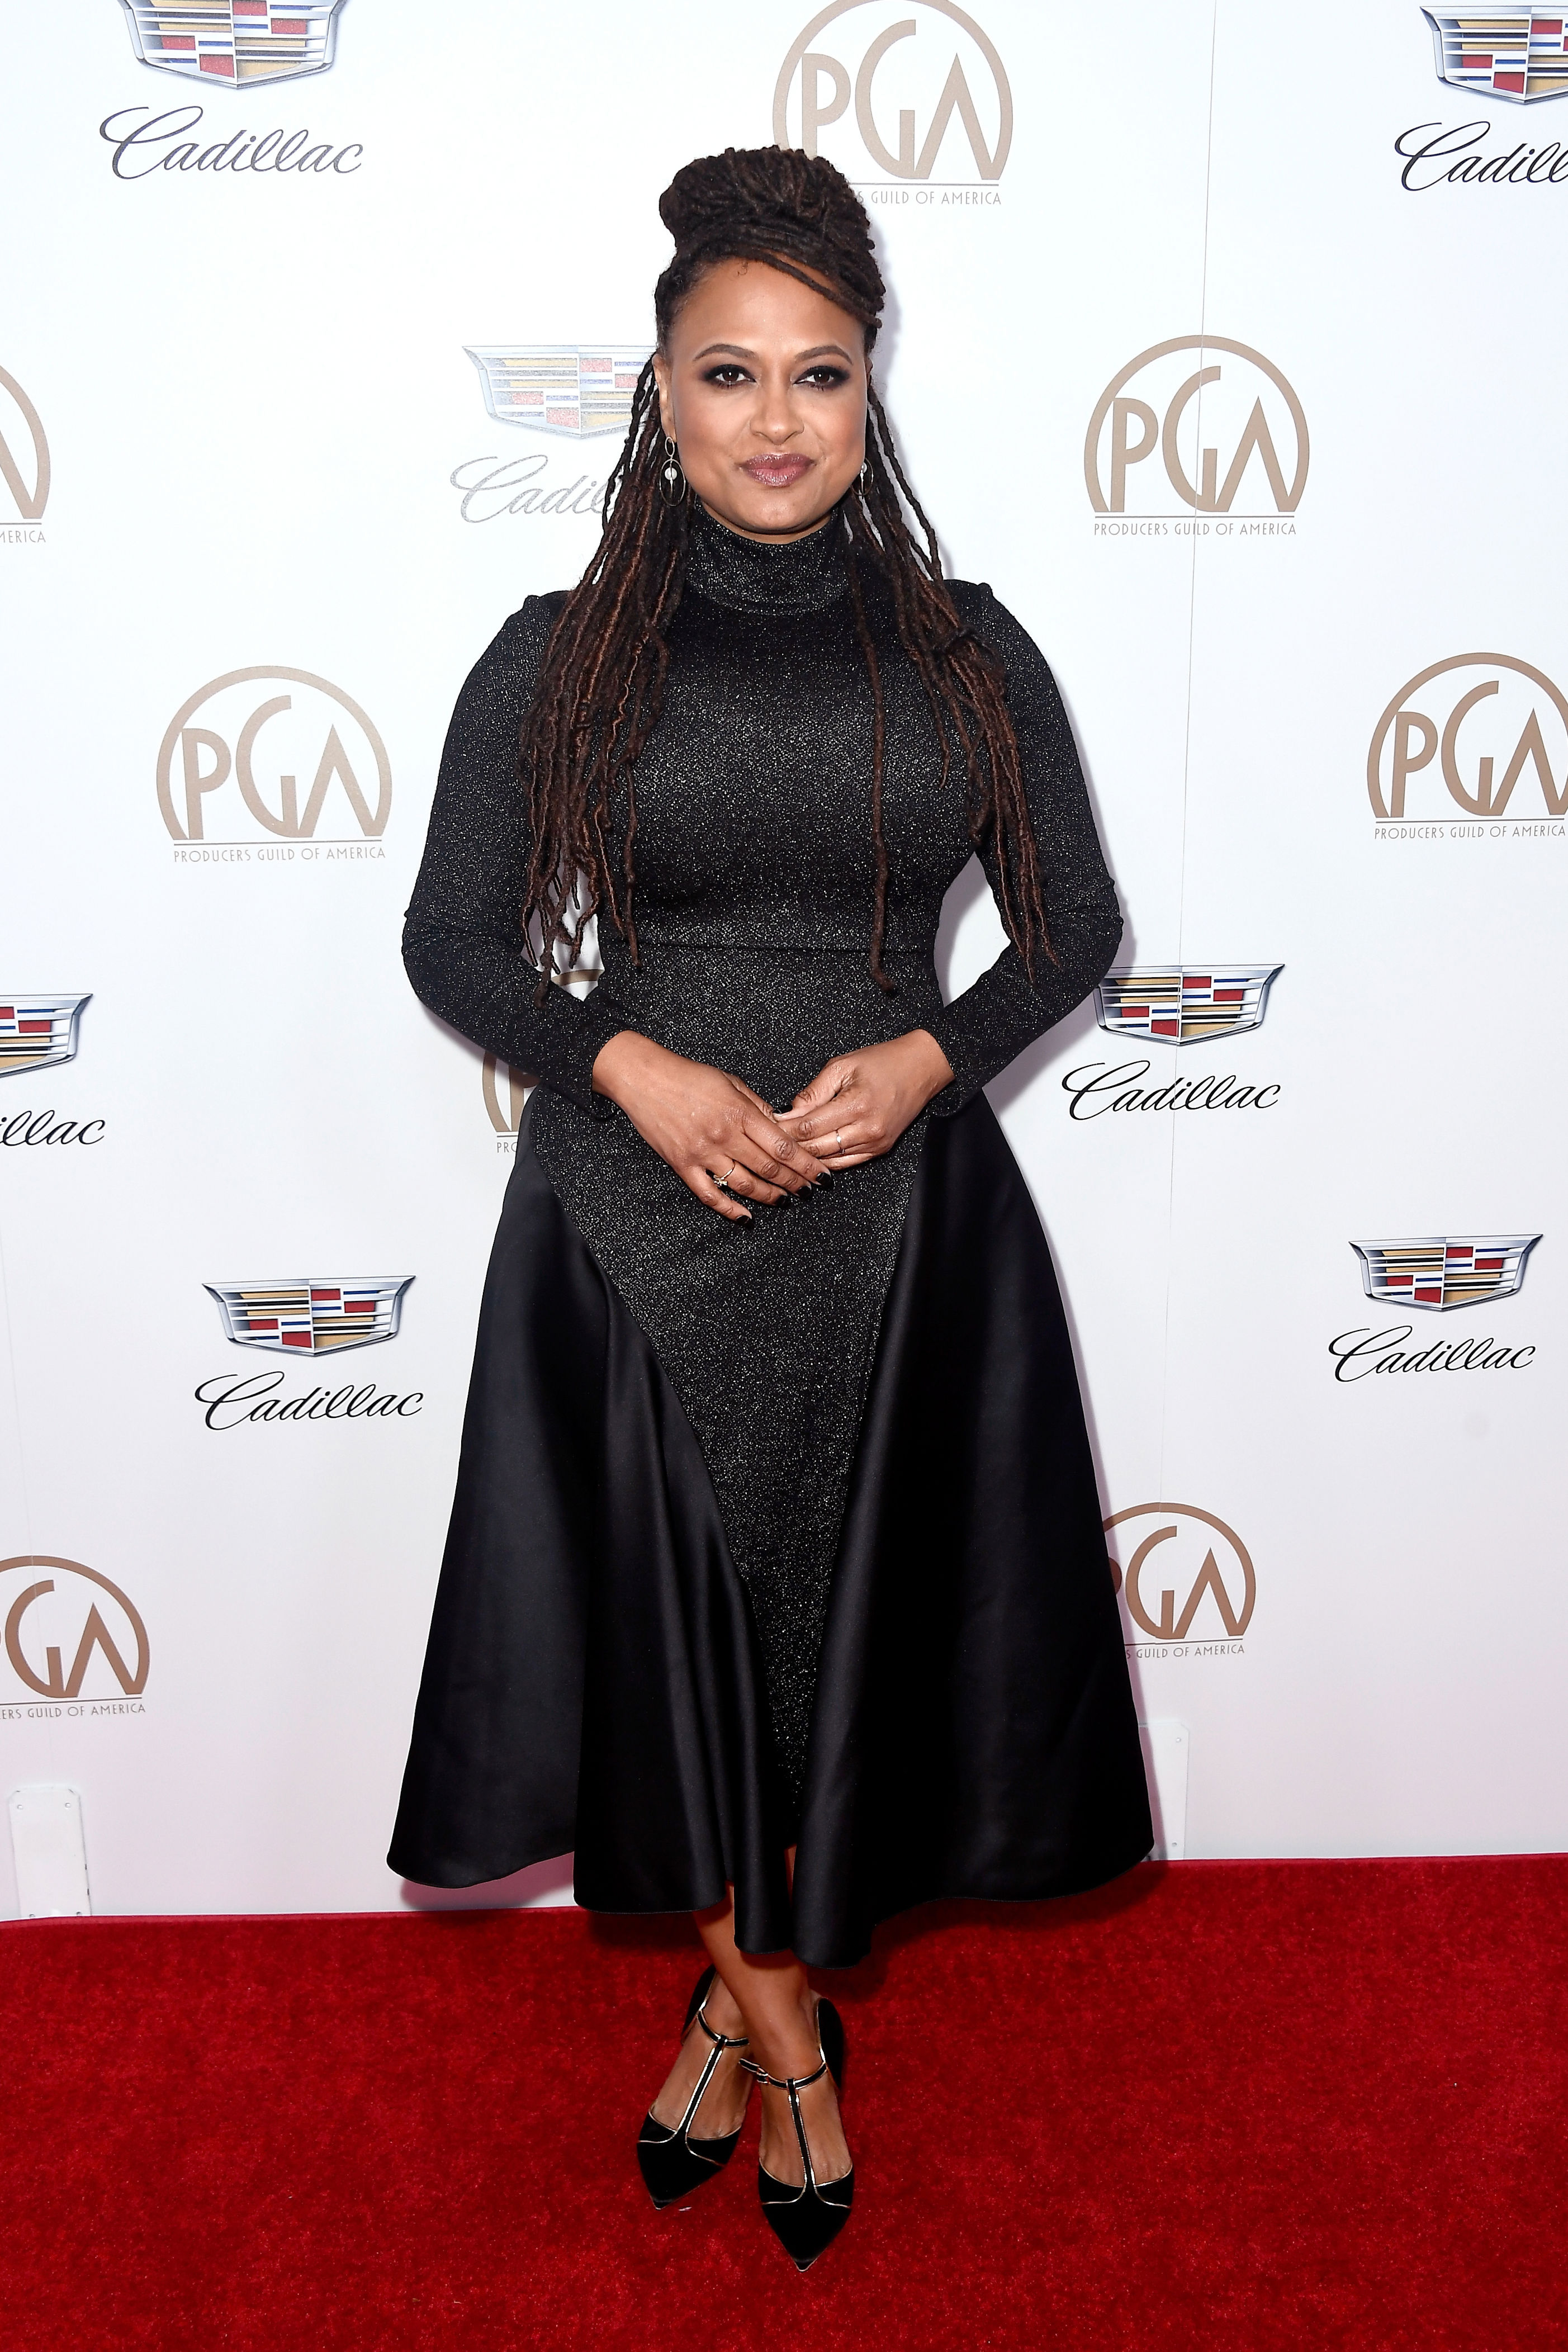 <p>In 2016, Ava DuVernay became the first Black female director to helm a film with a budget of more than $100M when she was selected by Disney to direct an adaptation of "A Wrinkle in Time." It wasn't the first time she made history wither: In 2012, Ava became the first Black woman to win the best director award during the Sundance Film Festival (for her film "Middle of Nowhere"). On top of all that, in 2017, Ava became the first Black woman to receive an Oscar nomination for best documentary feature. That nod was for "13th," which she wrote, directed and produced.</p>